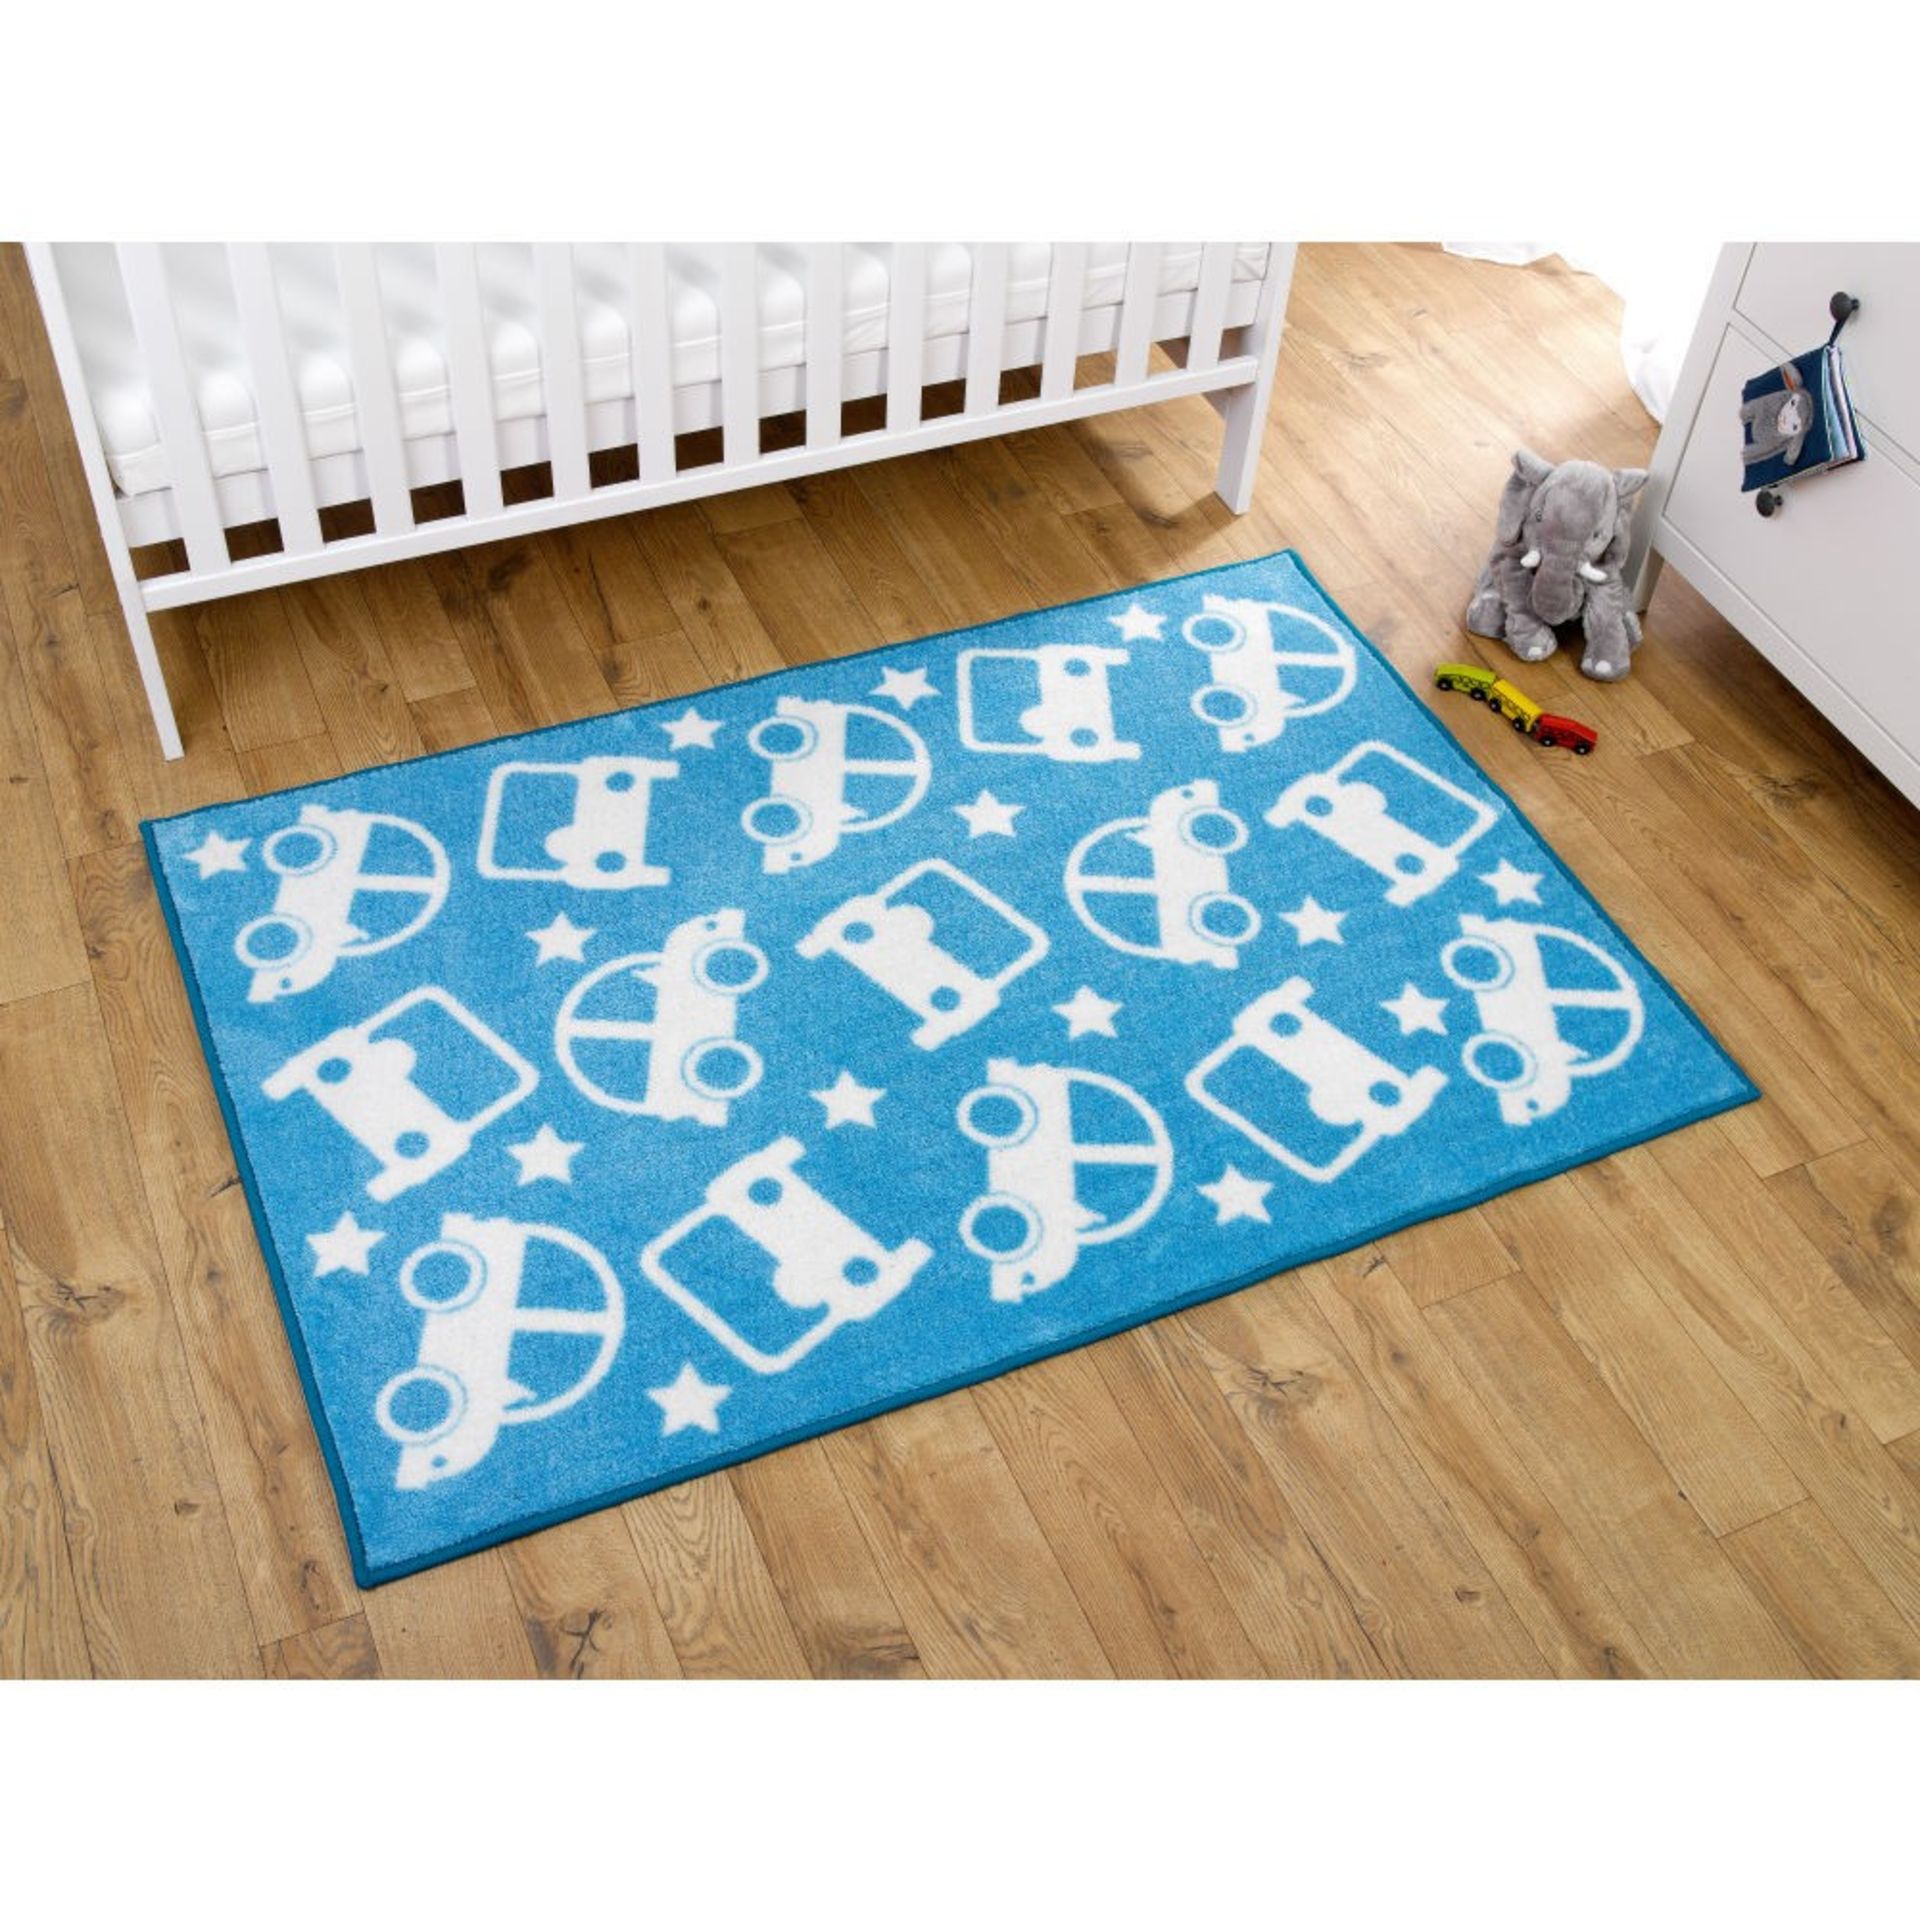 CARS NURSERY RUG 150X100CMS (DELIVERY BAND A)